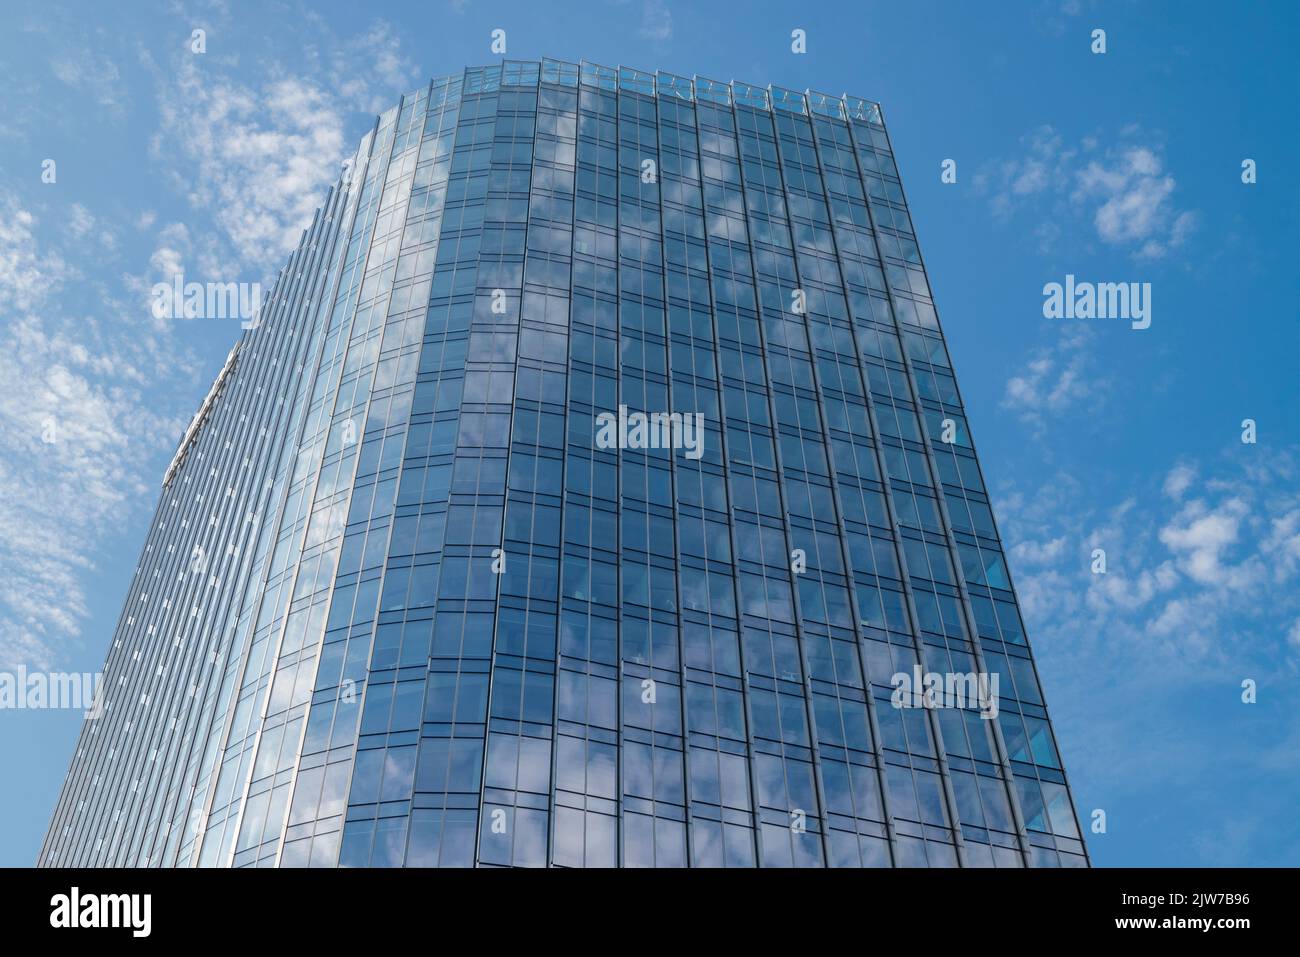 architecture facade financial office building, glass modern skyscrapers towers against the sky Stock Photo